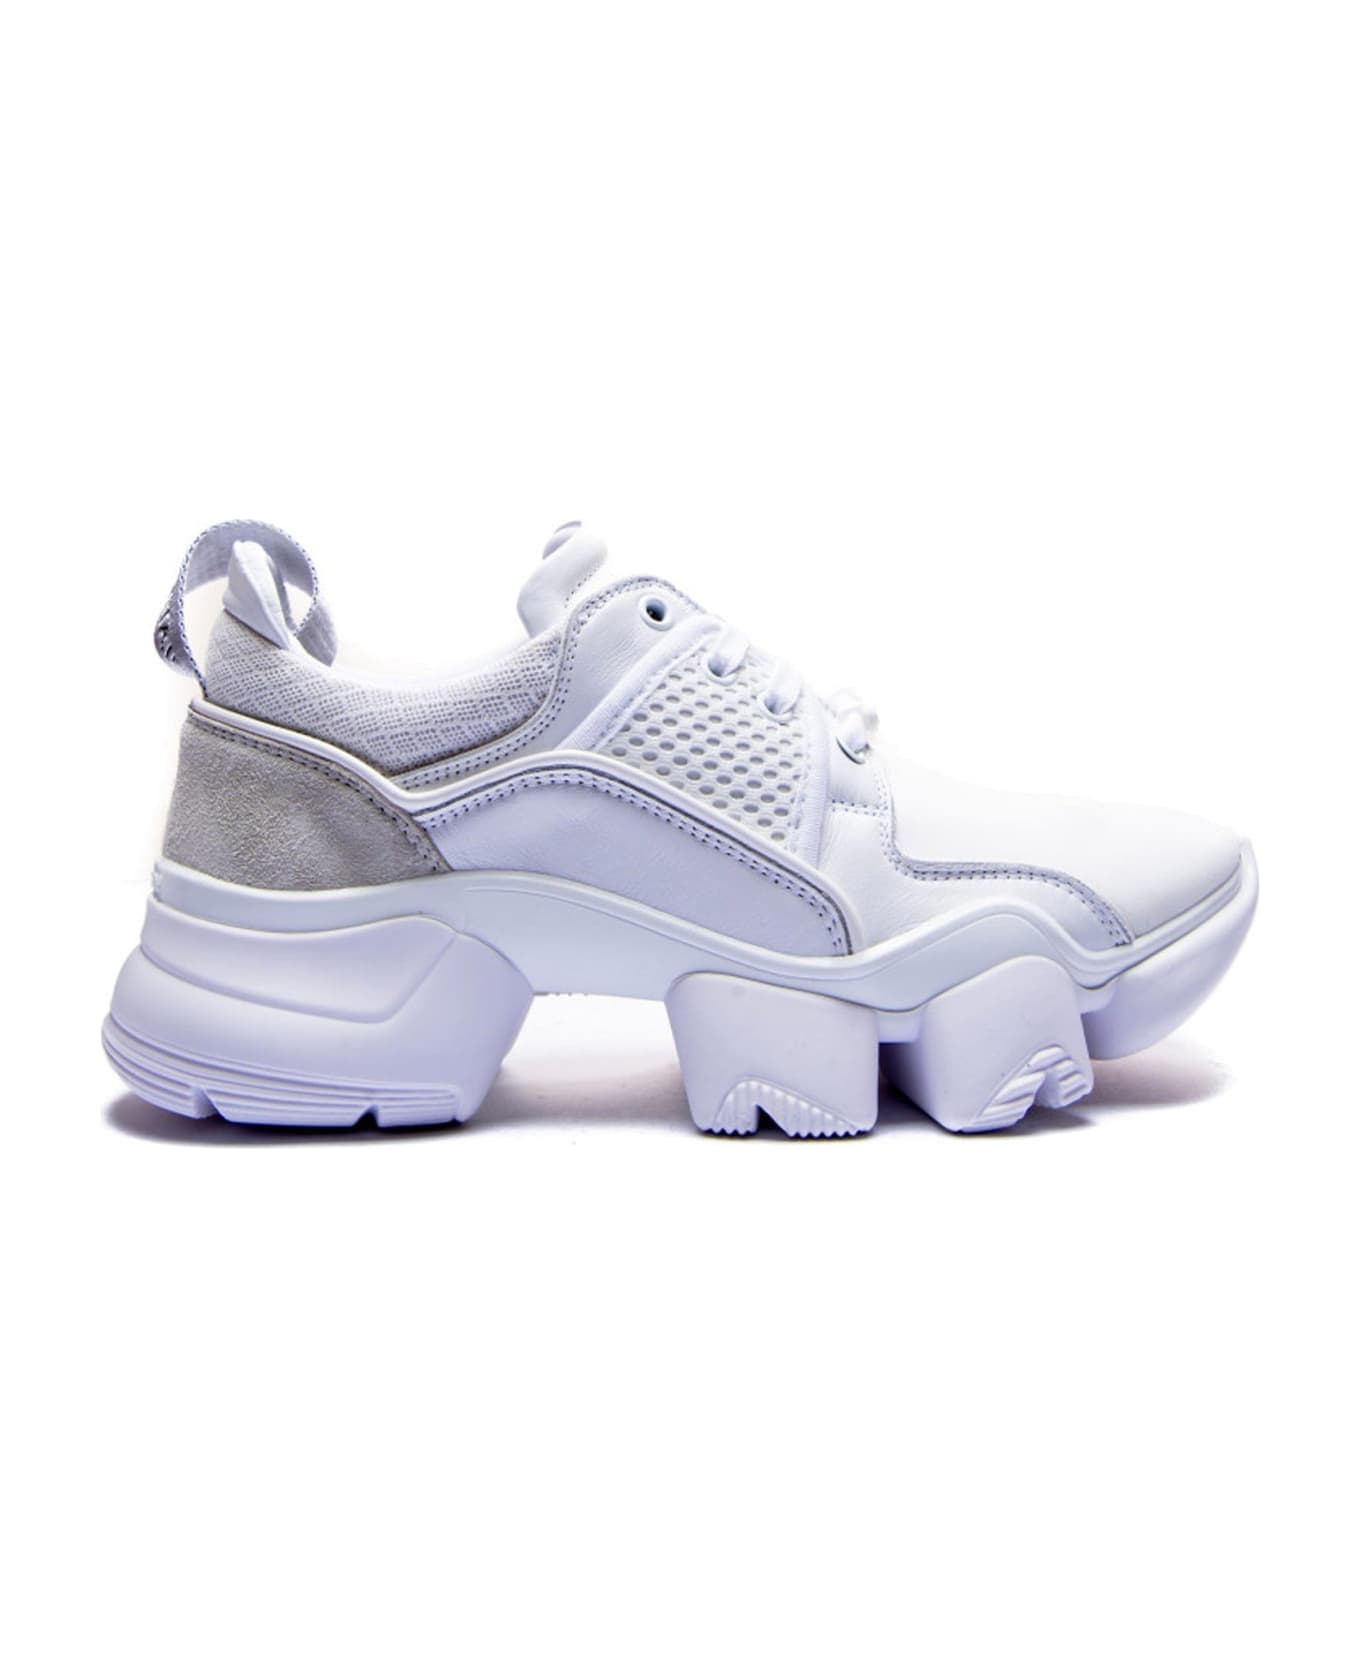 Givenchy Jaw Leather Sneakers - White